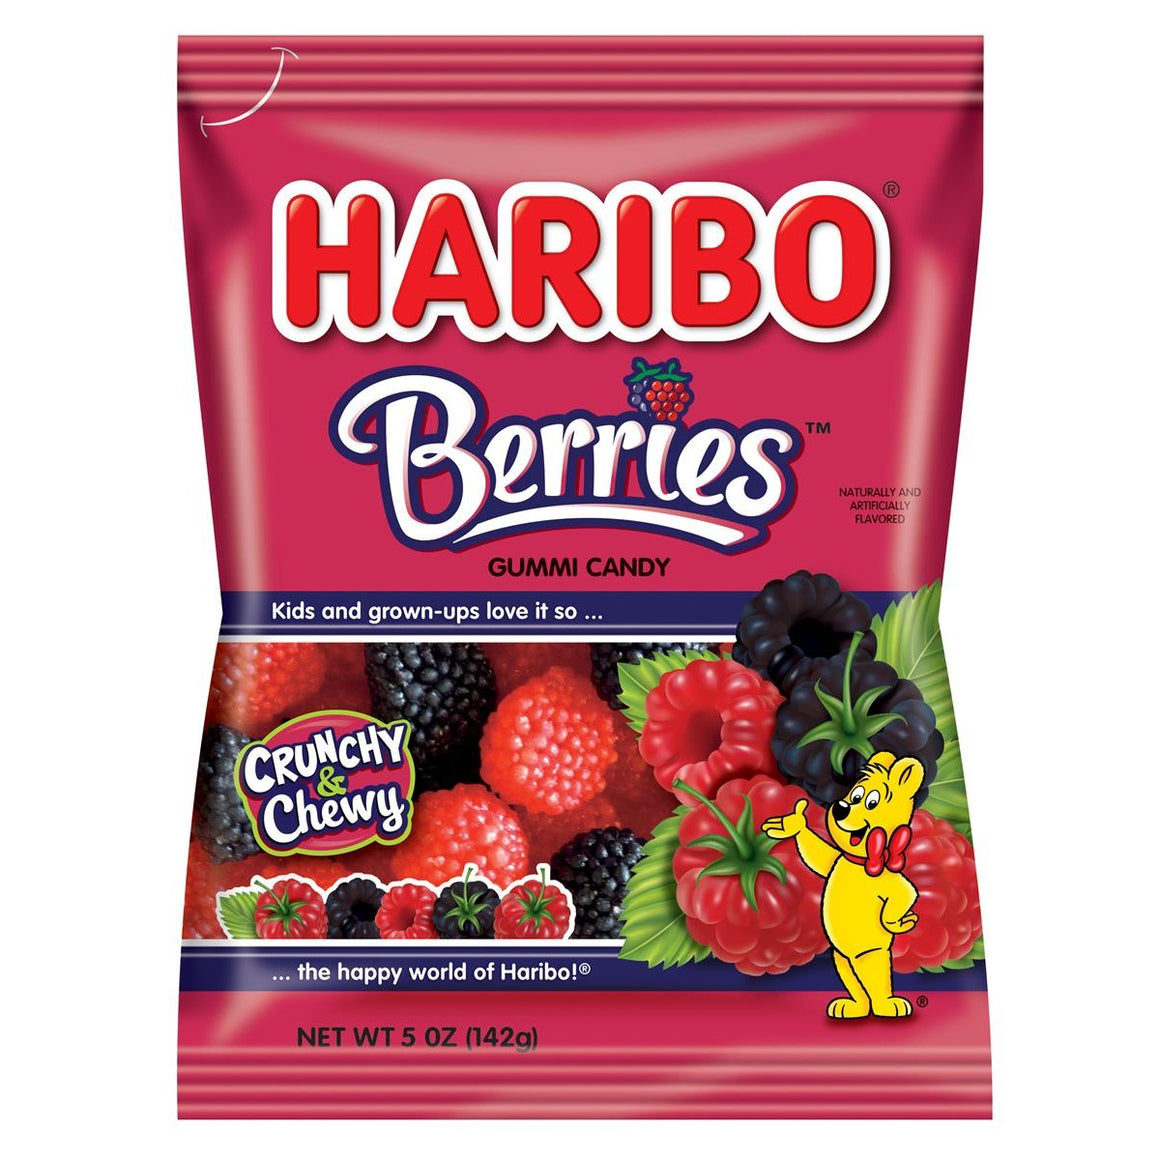 All City Candy Haribo Berries Gummi Candy - 5-oz. Bag Gummi Haribo Candy For fresh candy and great service, visit www.allcitycandy.com